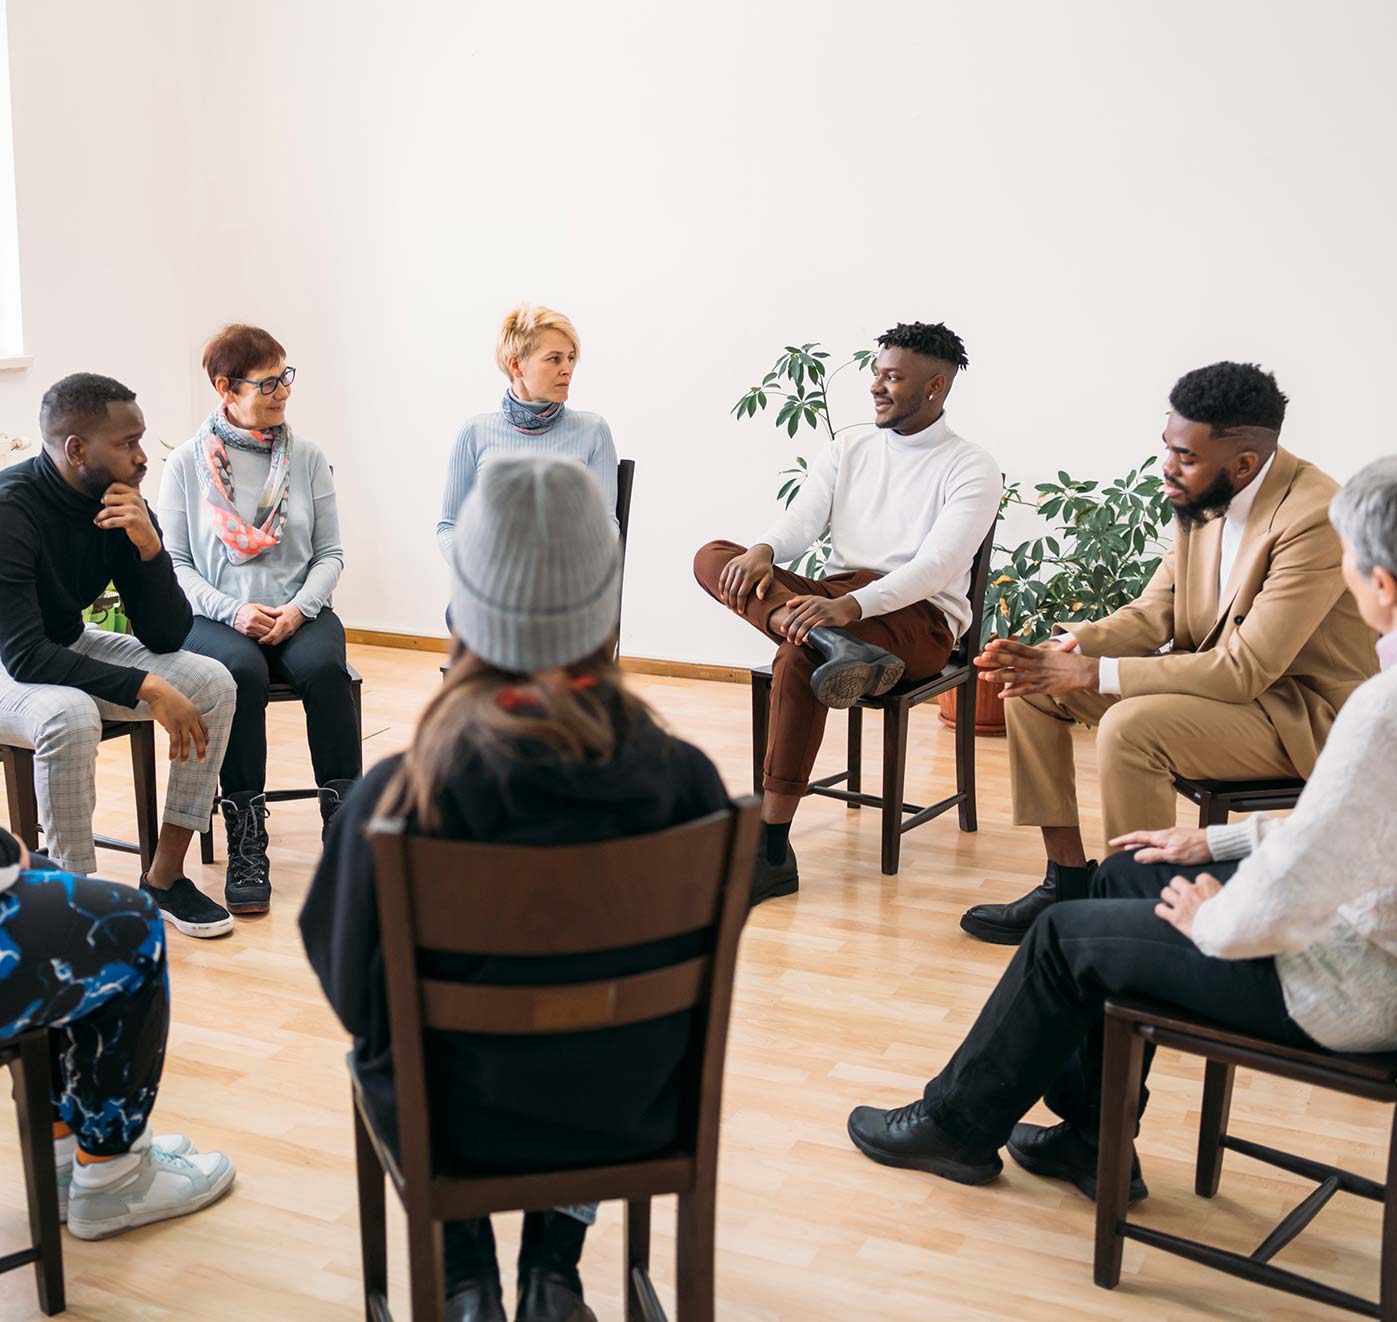 A group of people sitting around a circle having a meeting